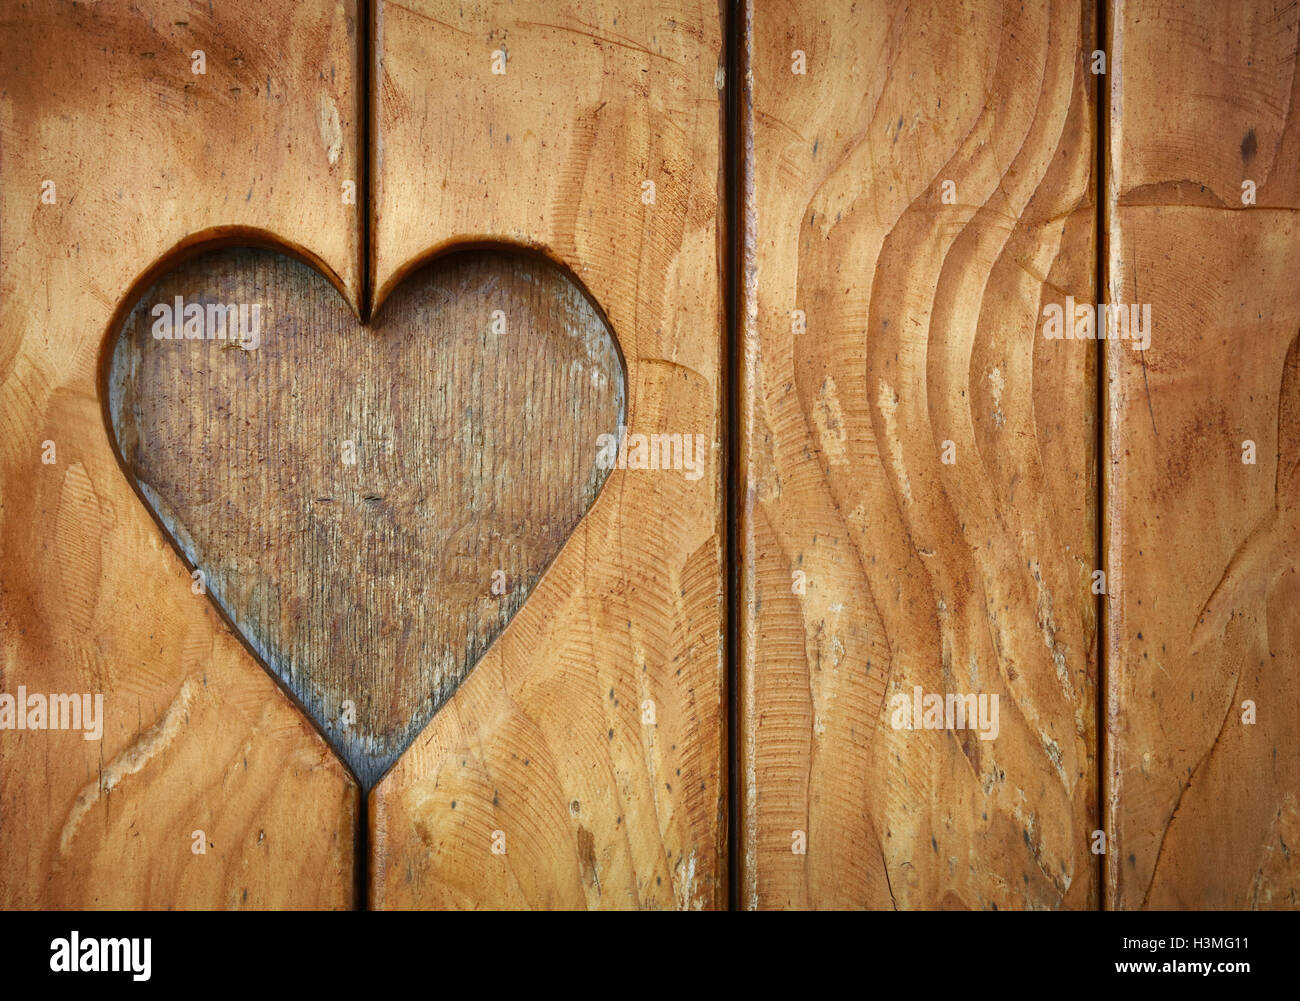 One heart shape, symbol of love and romance, wood carved cut in vintage old grunge natural brown wooden planks texture backgroun Stock Photo